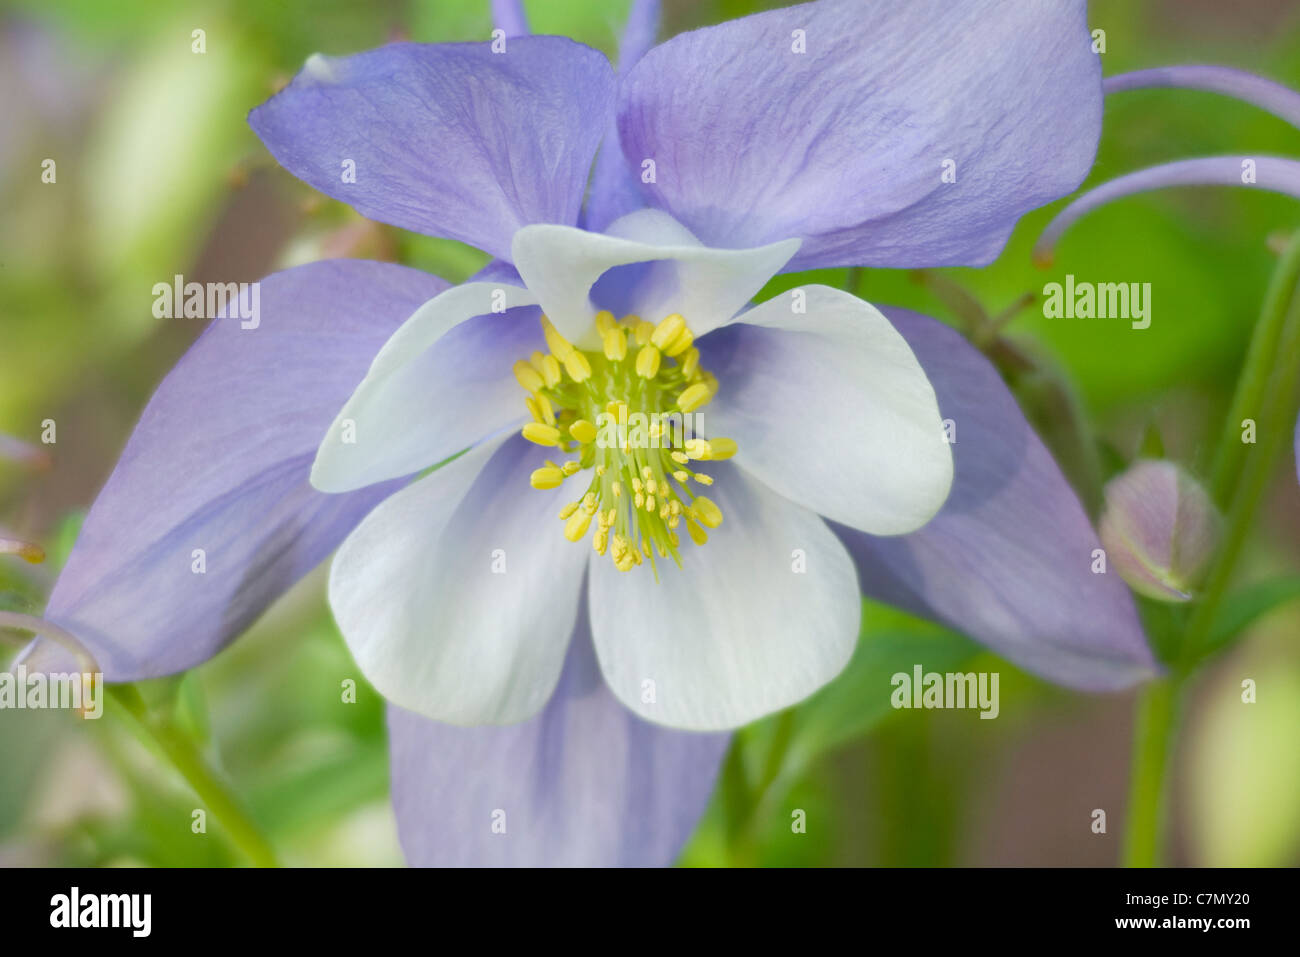 columbine plant in full bloom with purple and white petals surrounding the stamen, filament and anthers Stock Photo